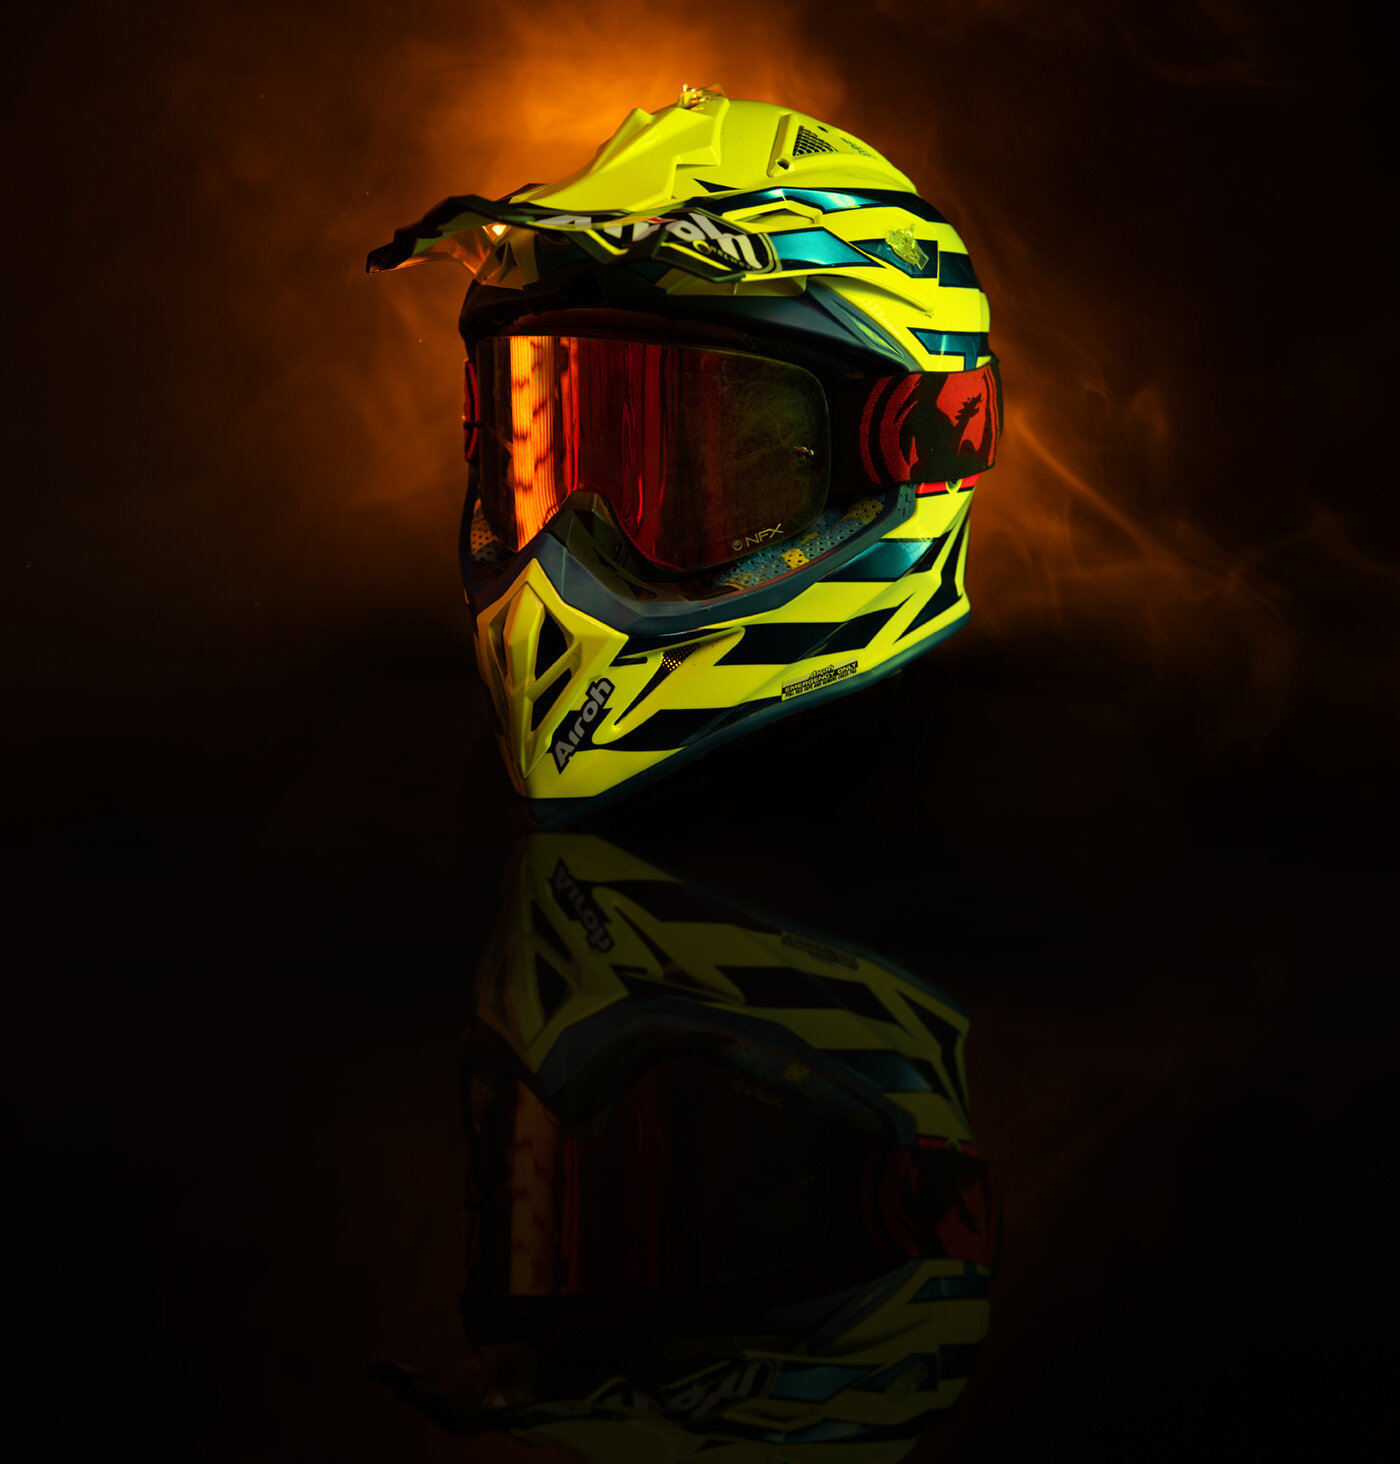 airoh_helmets_product_photography2.jpg